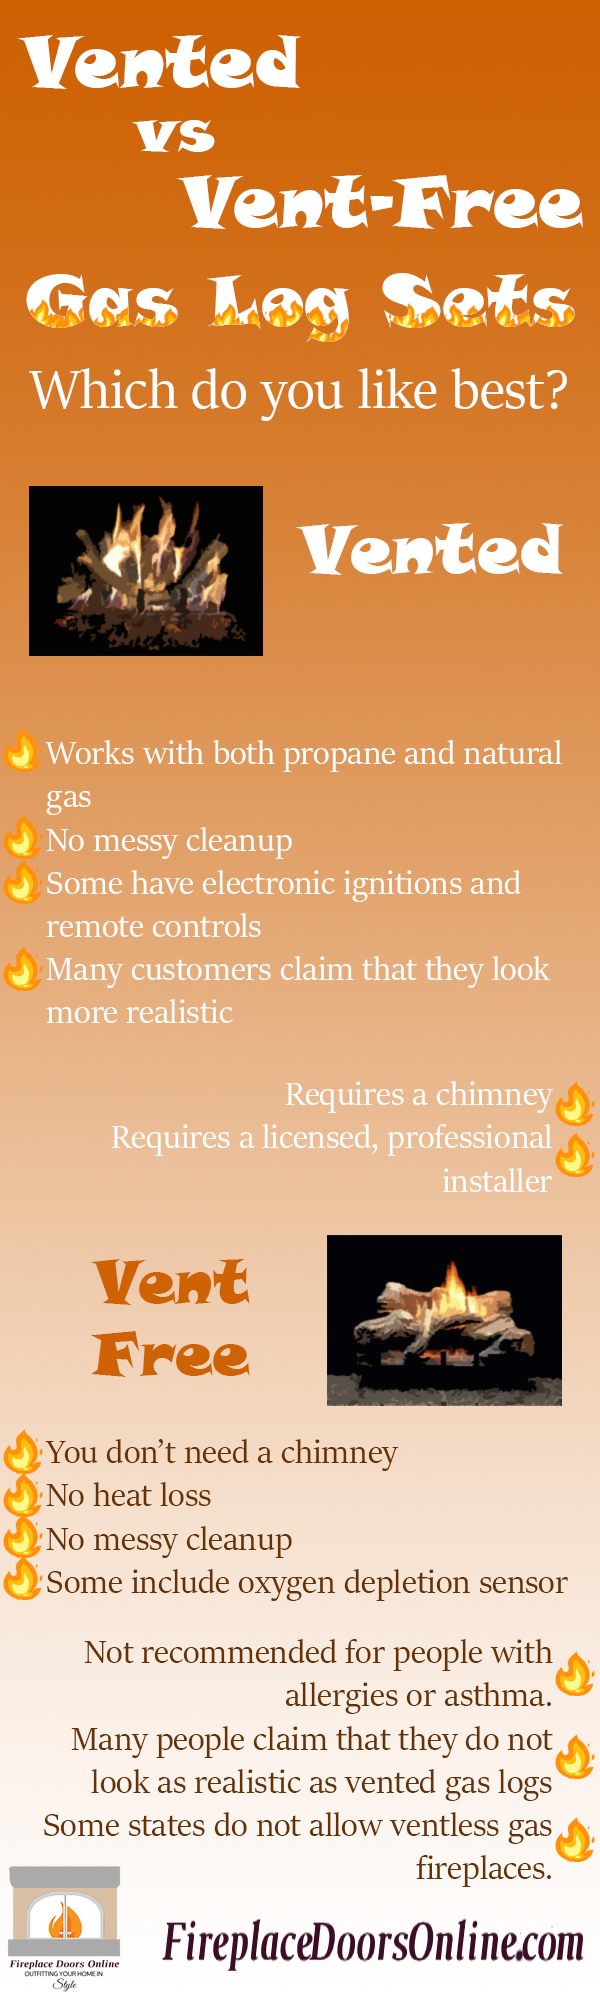 Gas Logs The Log Experts, Compare Vented And Vent Free Gas Fireplaces